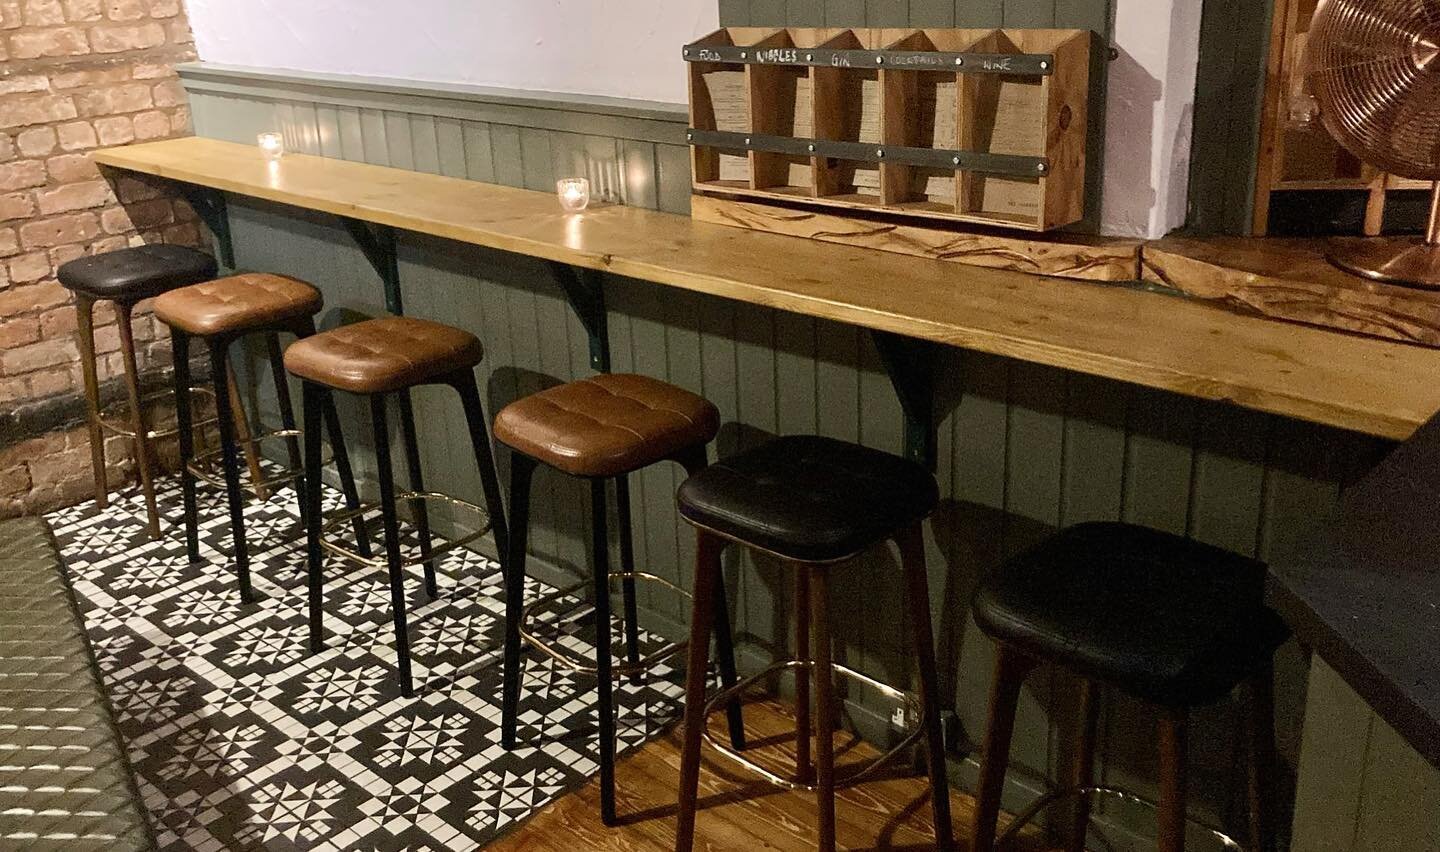 Sexy new stools for a sexy new bar. Come and perch this weekend. 

#independentchester #familybusiness #bespokefurniture #foreverrenovating #cornerhousechester #livemusic #tiledfloor #bardecor